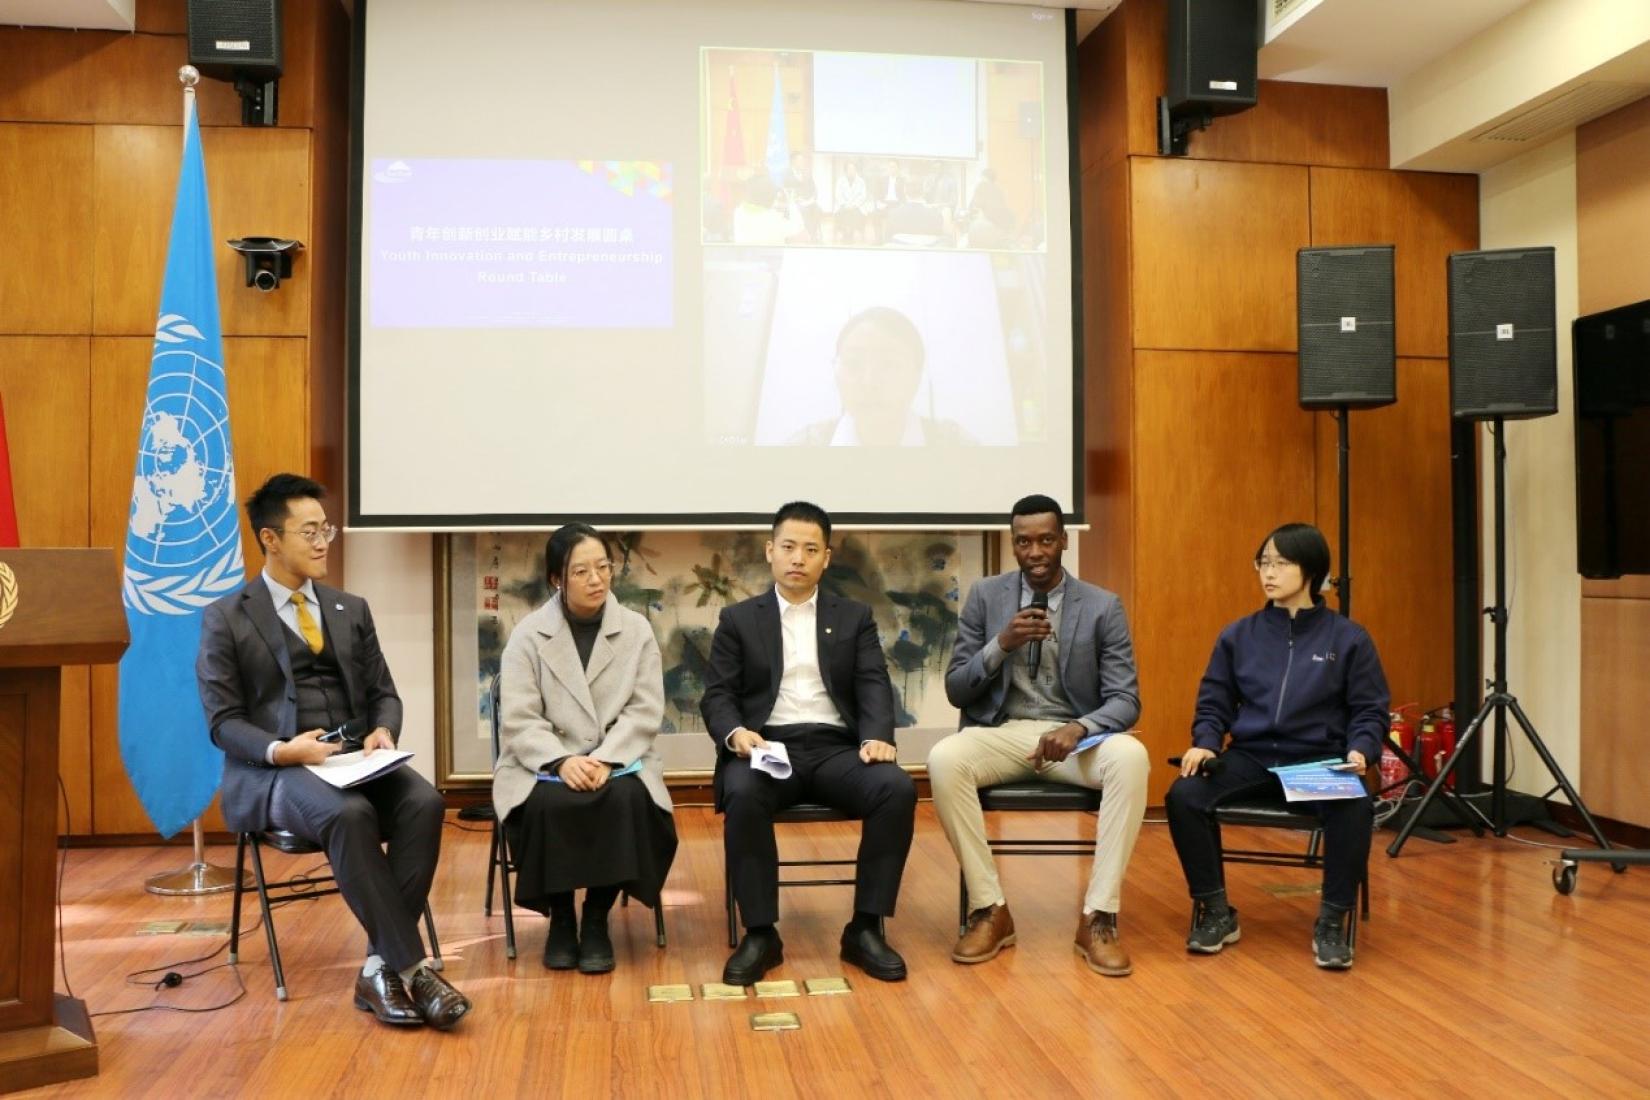 Representatives from social groups, enterprises, research institutes, universities, and international organizations participate in the International Forum on Sci-Tech Empowering Rural Transformation-2nd Event’s youth innovation and entrepreneurship round table. (Photo by Yang Jia/China.org.cn)